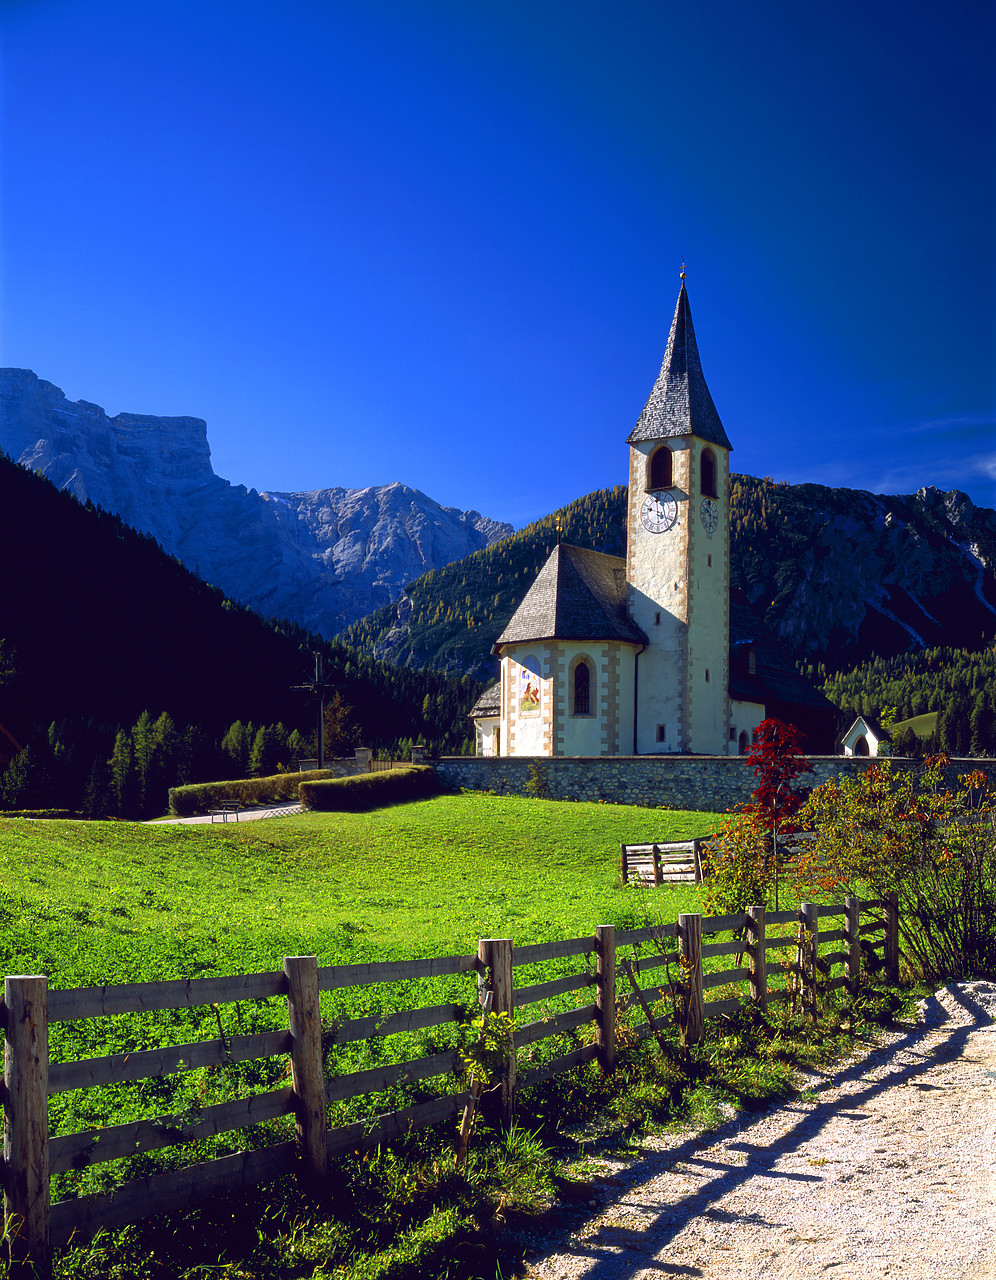 #060633-3 - Fence leading to Church, Braies, Dolomites, Italy